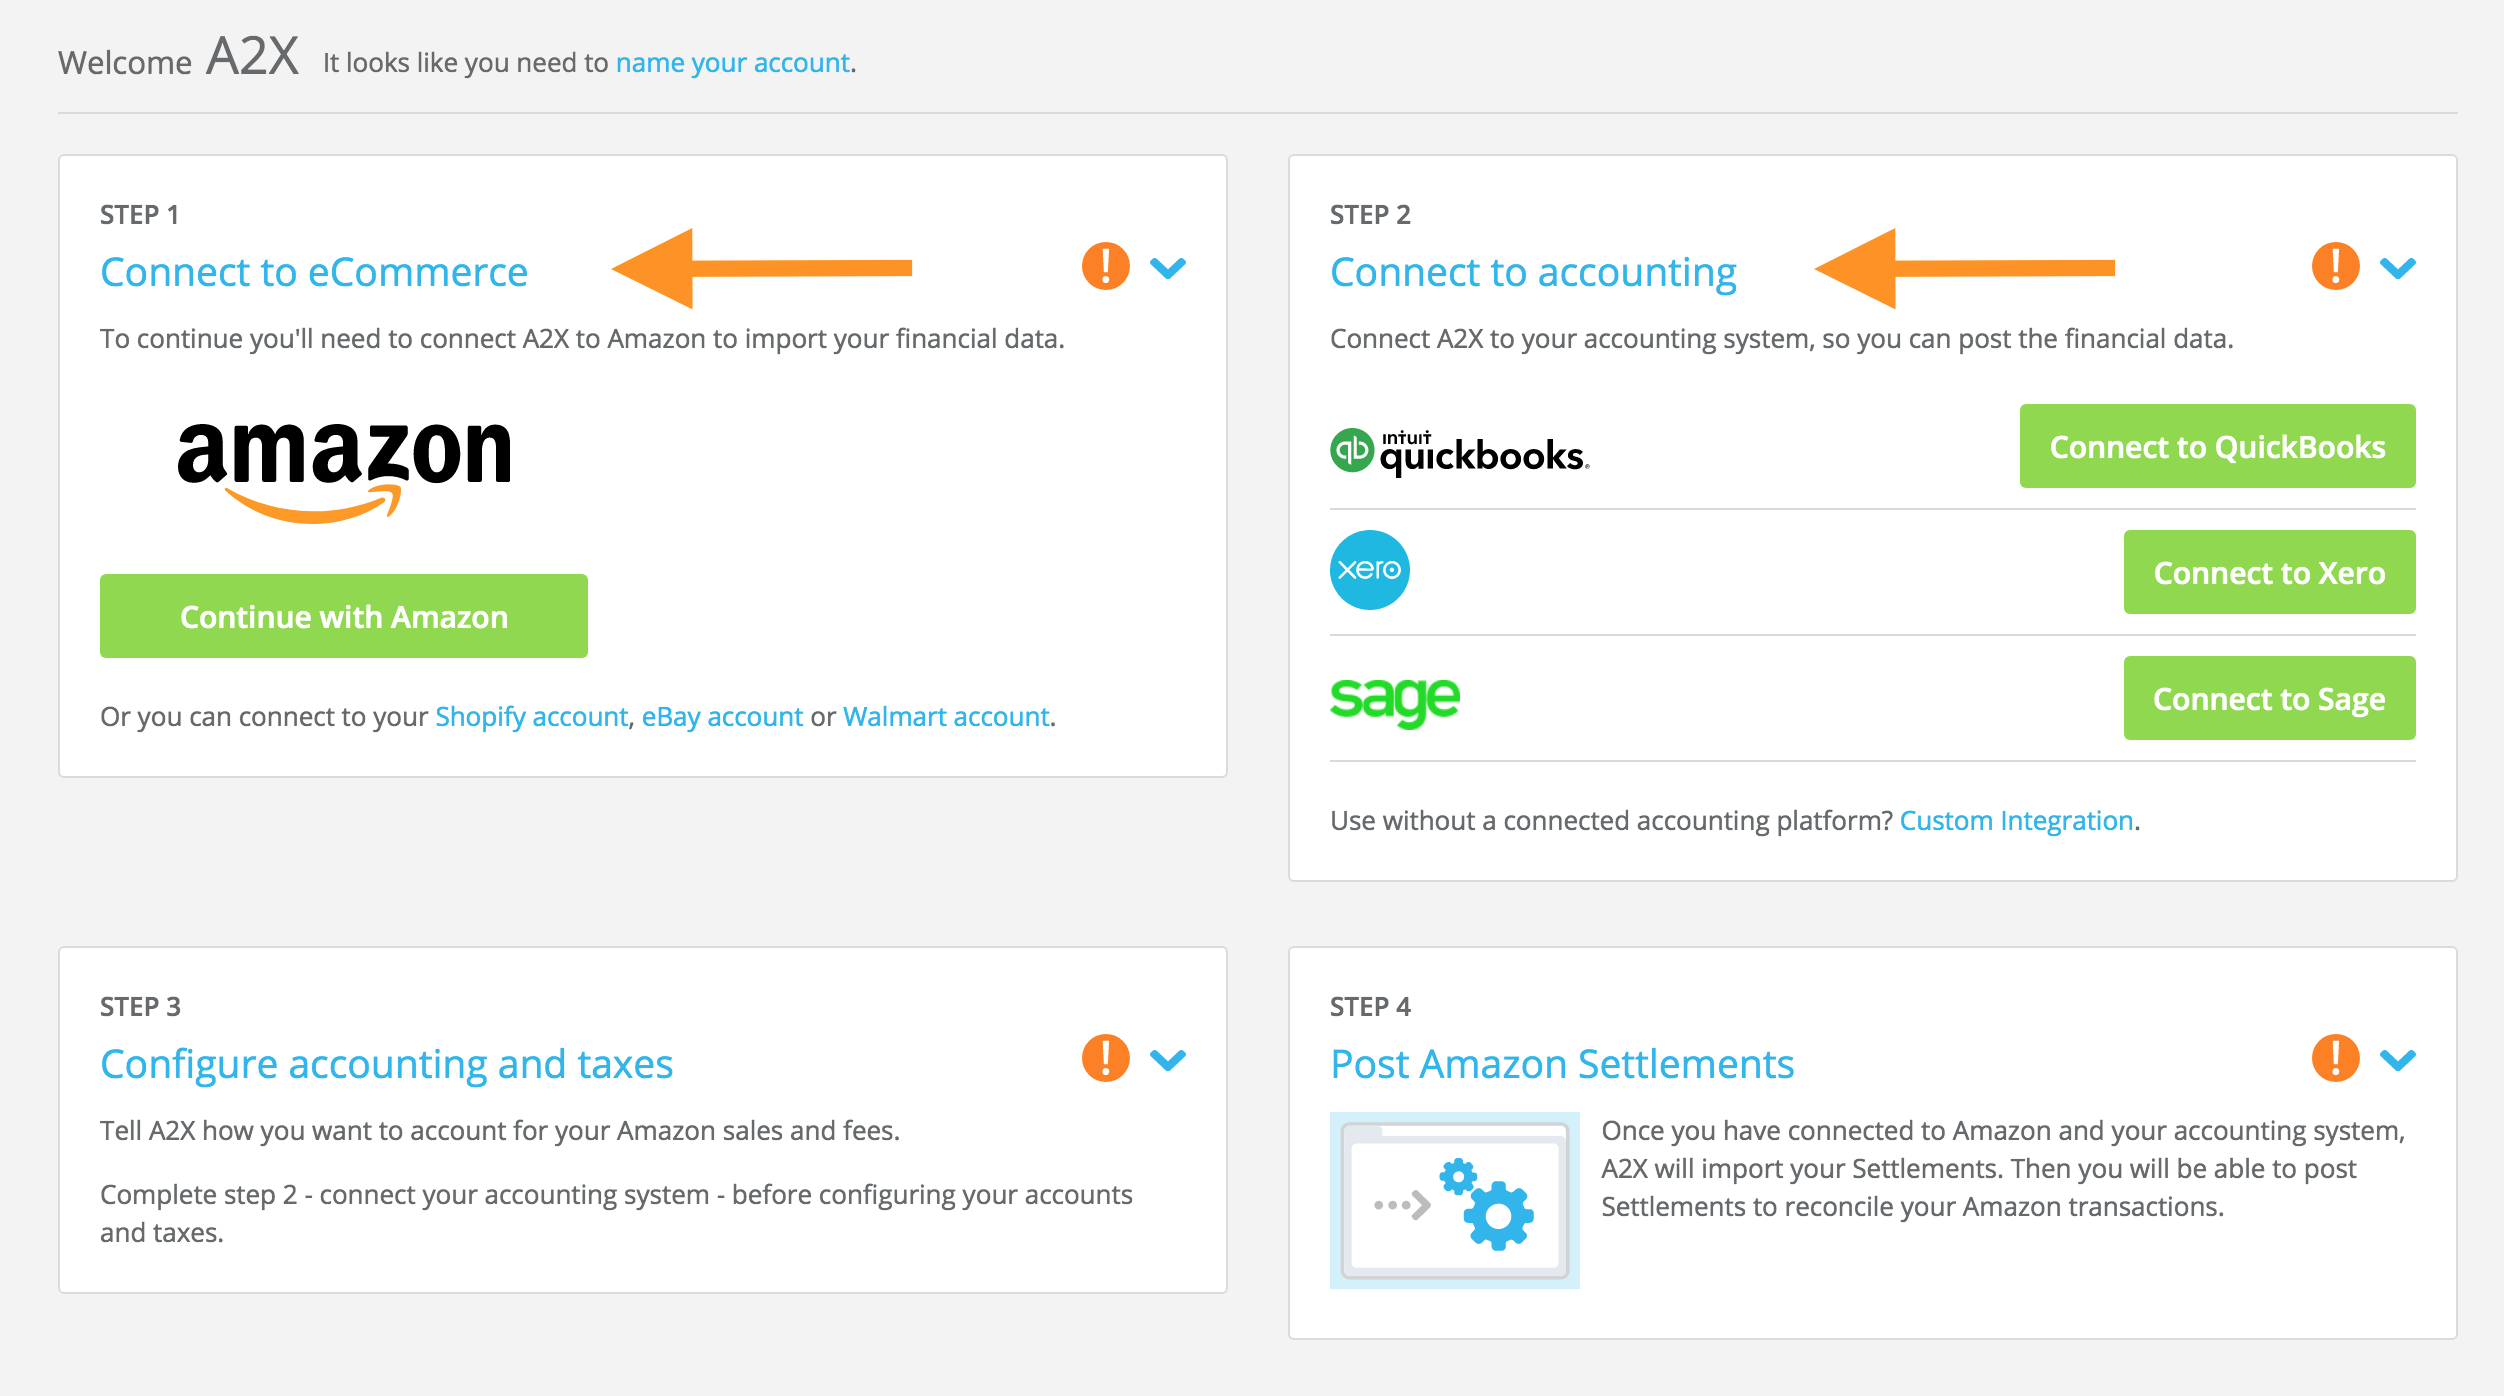 A screenshot of the A2X dashboard prompting users to connect to ecommerce platform